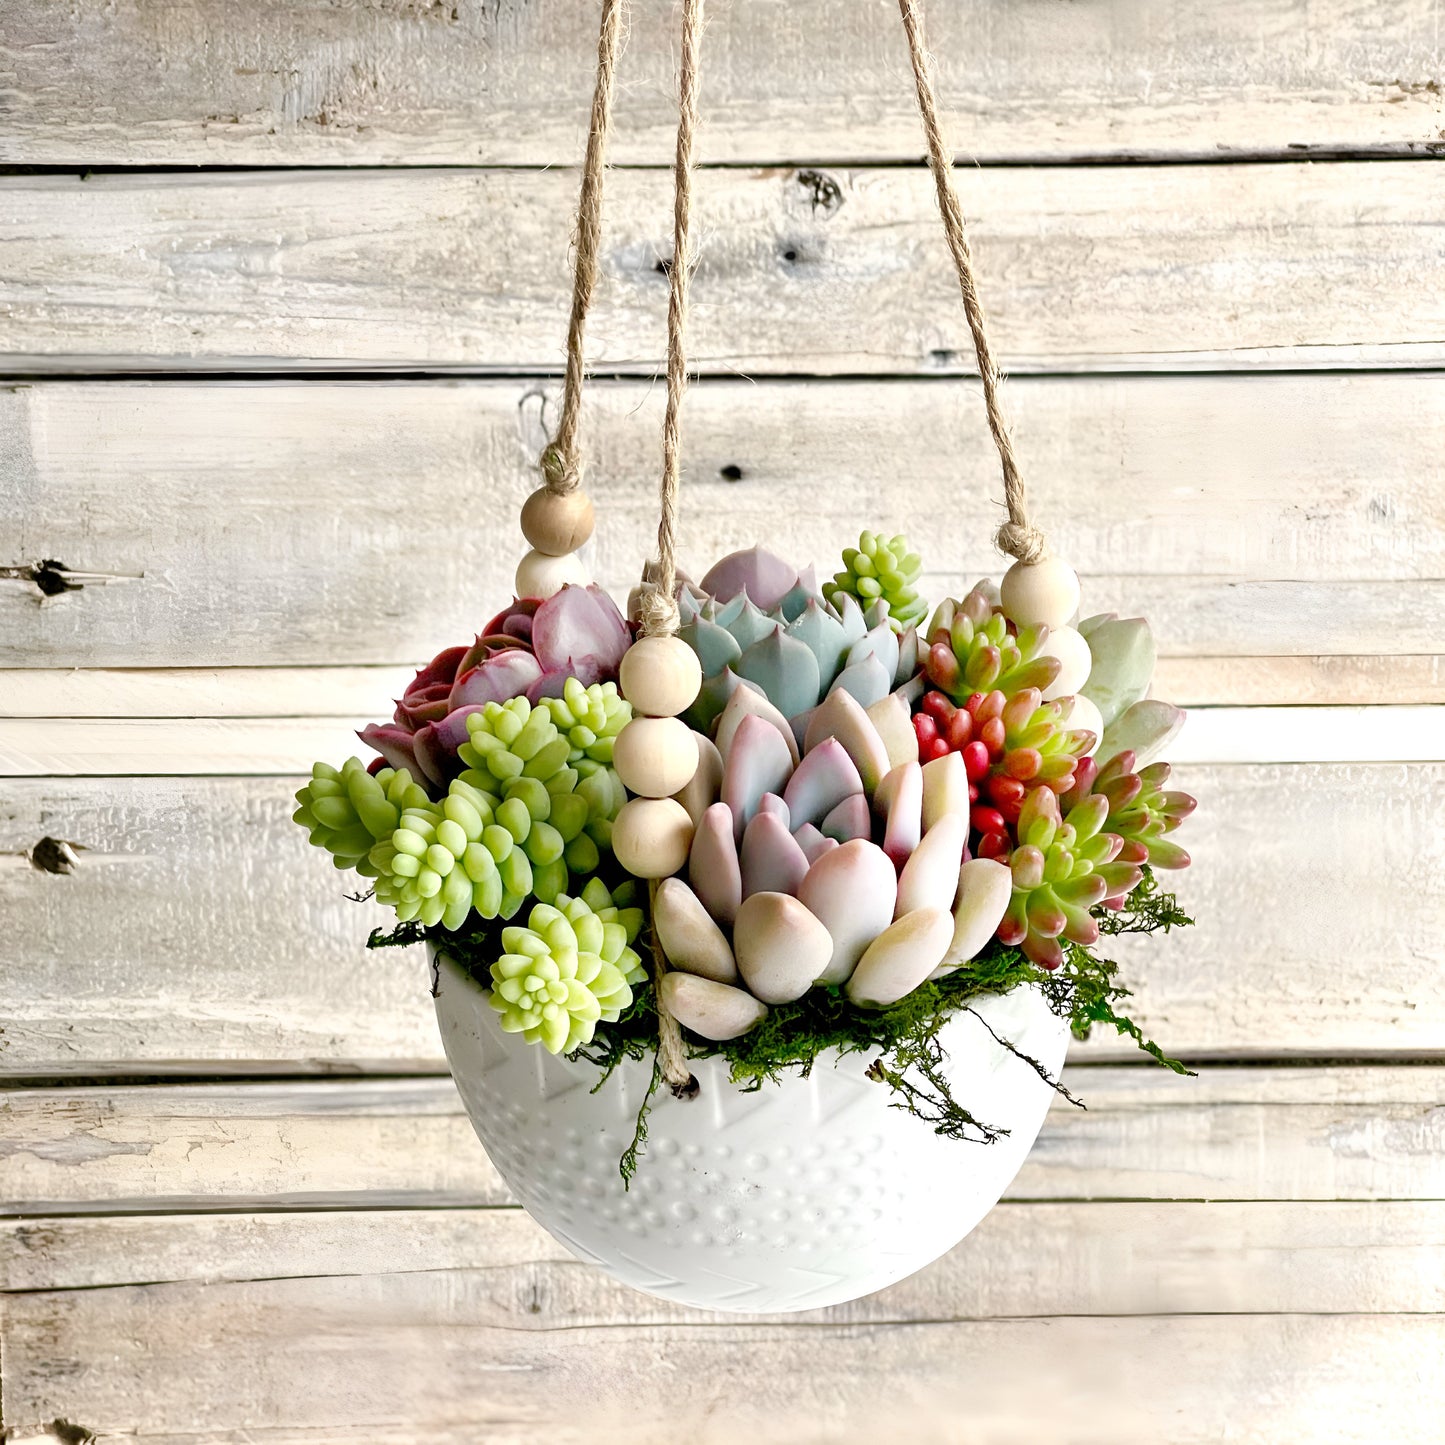 Lauren Hanging Planter Filled With Succulents